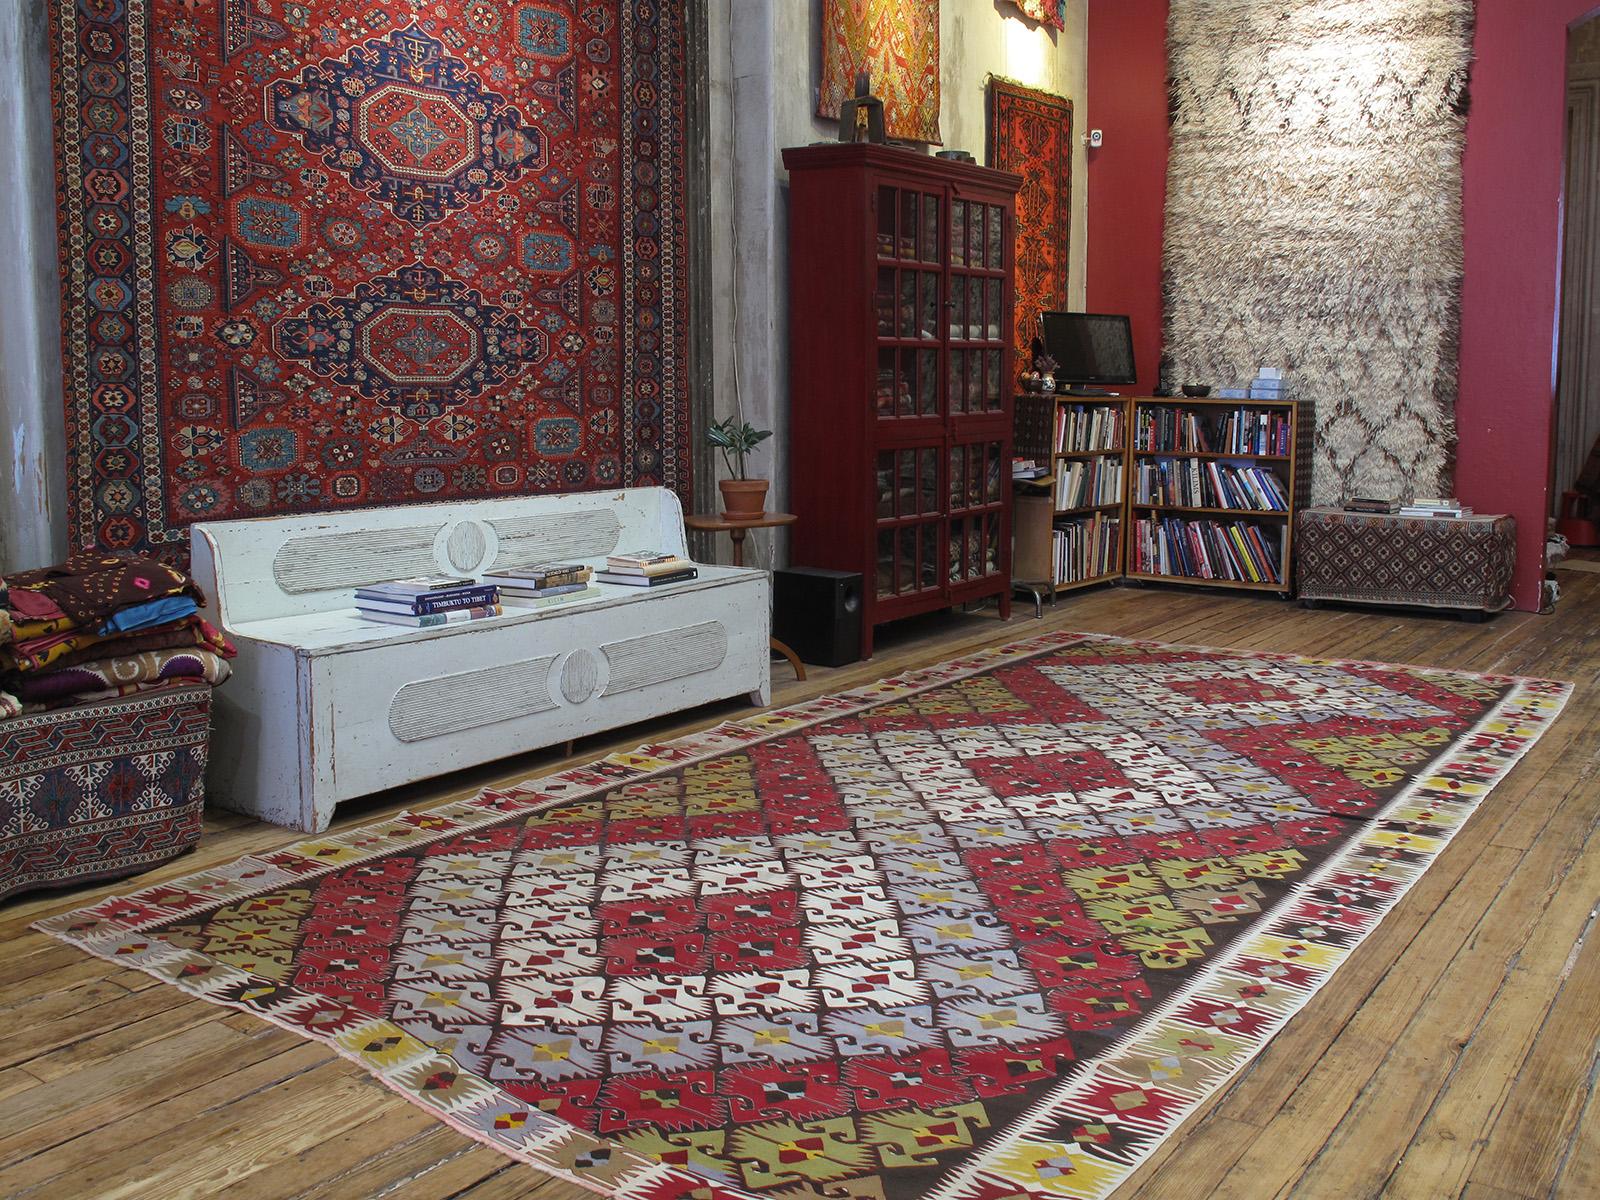 A Classic Turkish Kilim in unusually large size. Woven in two symmetrical halves, as is characteristic of this type.